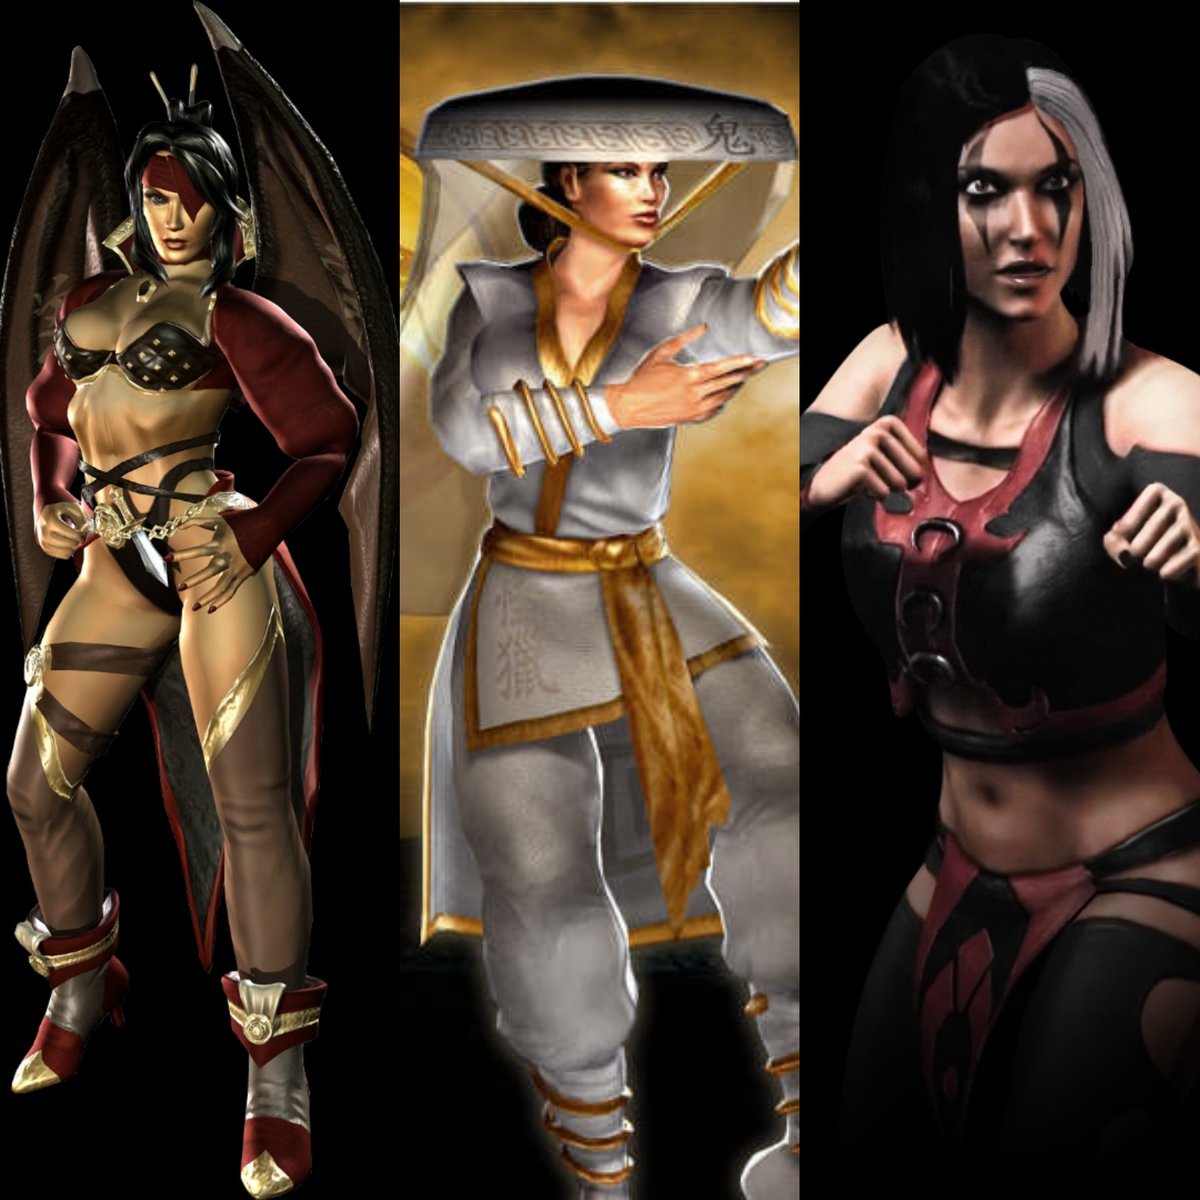 3 ladies, I'm trying to see in Mortal Kombat 1. All 3 deserve a come back. #MortalKombat1